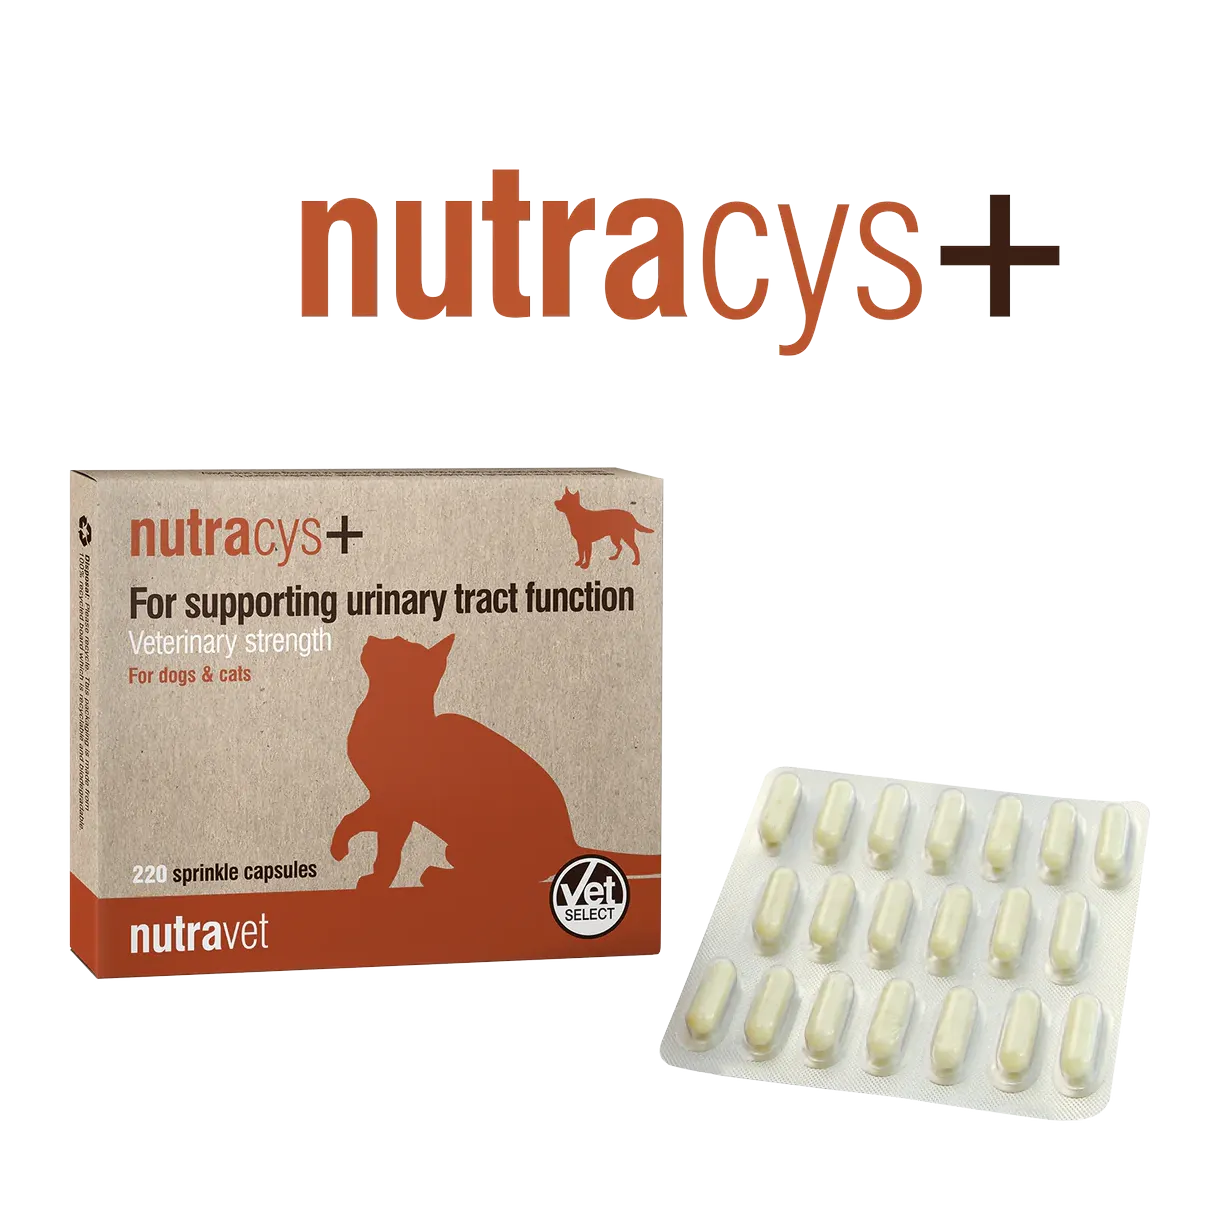 Nutravet - Nutracys+ (Urinary Supplement for Dogs & Cats) 220 caps